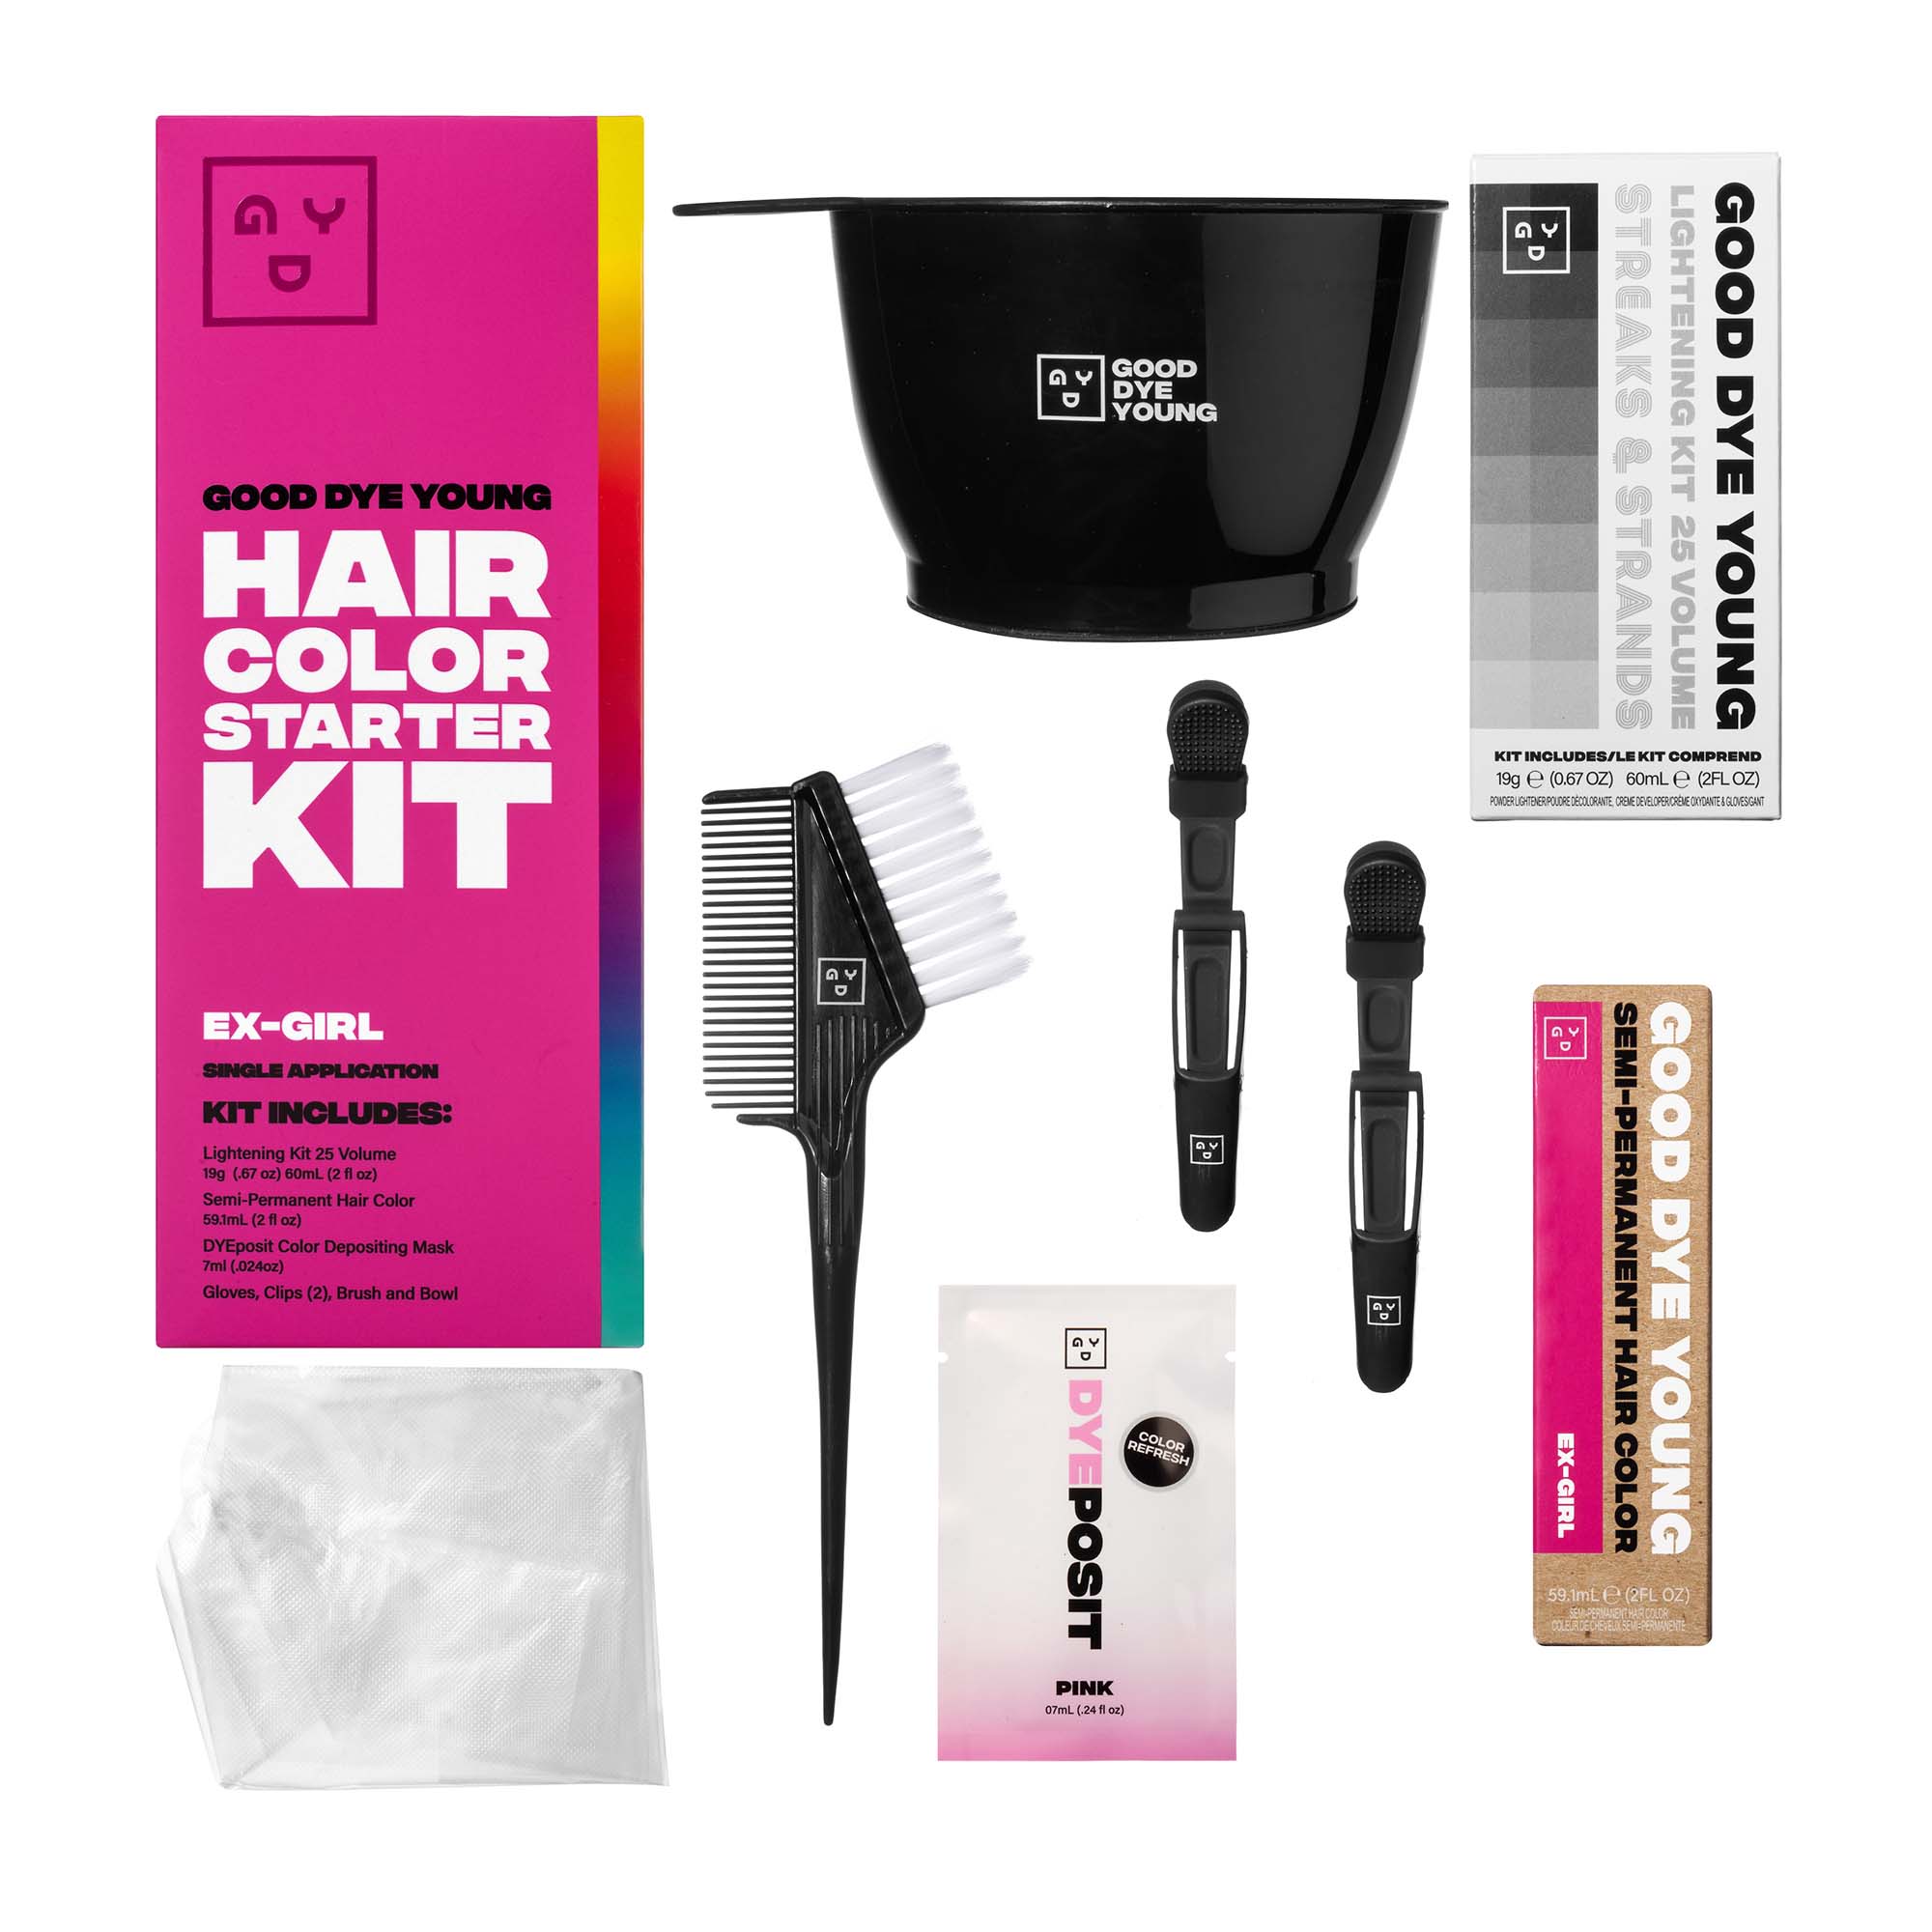 Good Dye Young Hair Color Starter Kit | Ex-Girl-Pink 7 PC